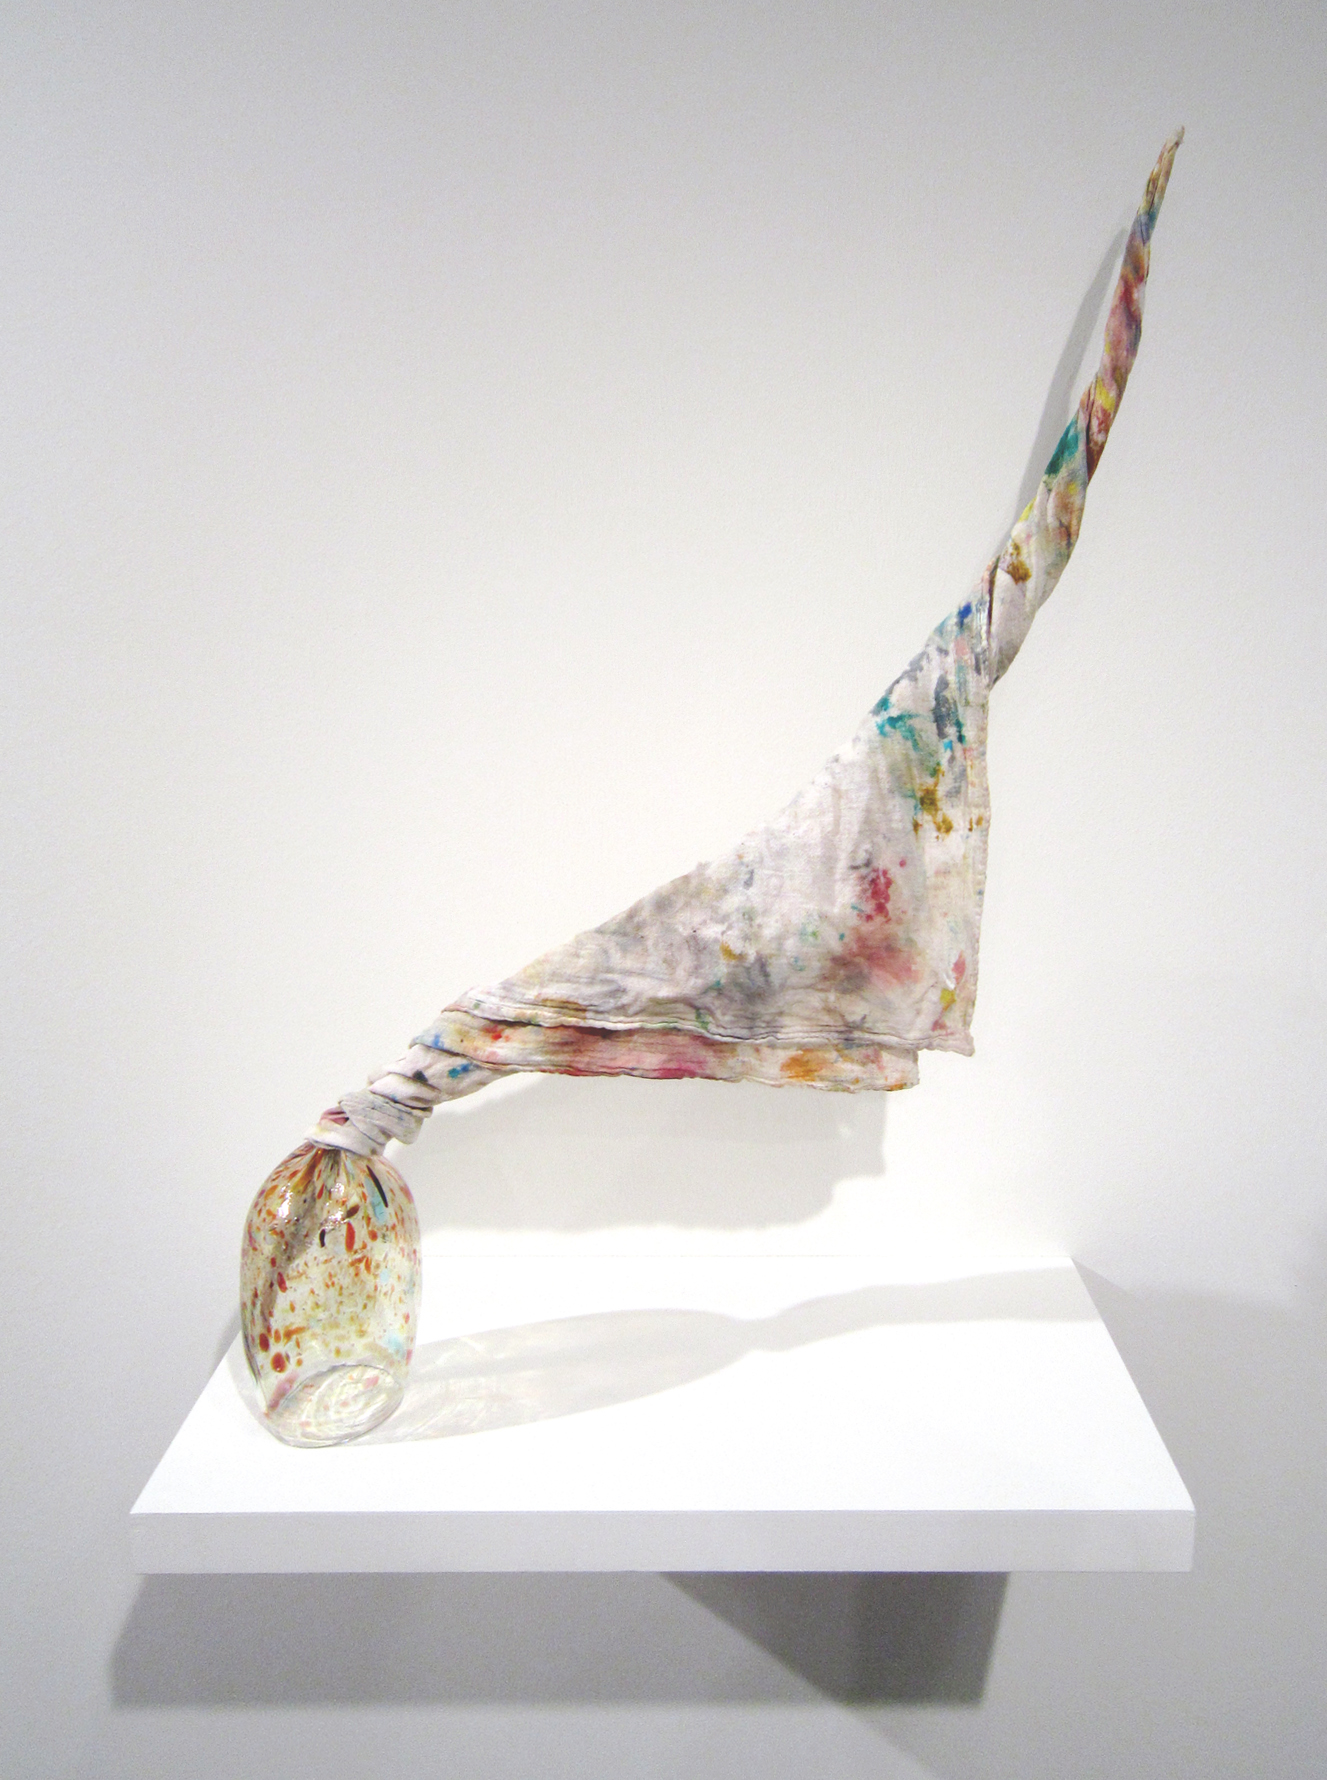   MOLLY SMITH   Wash, &nbsp;2013, glass and fabric, 28" x 22" x 5" 